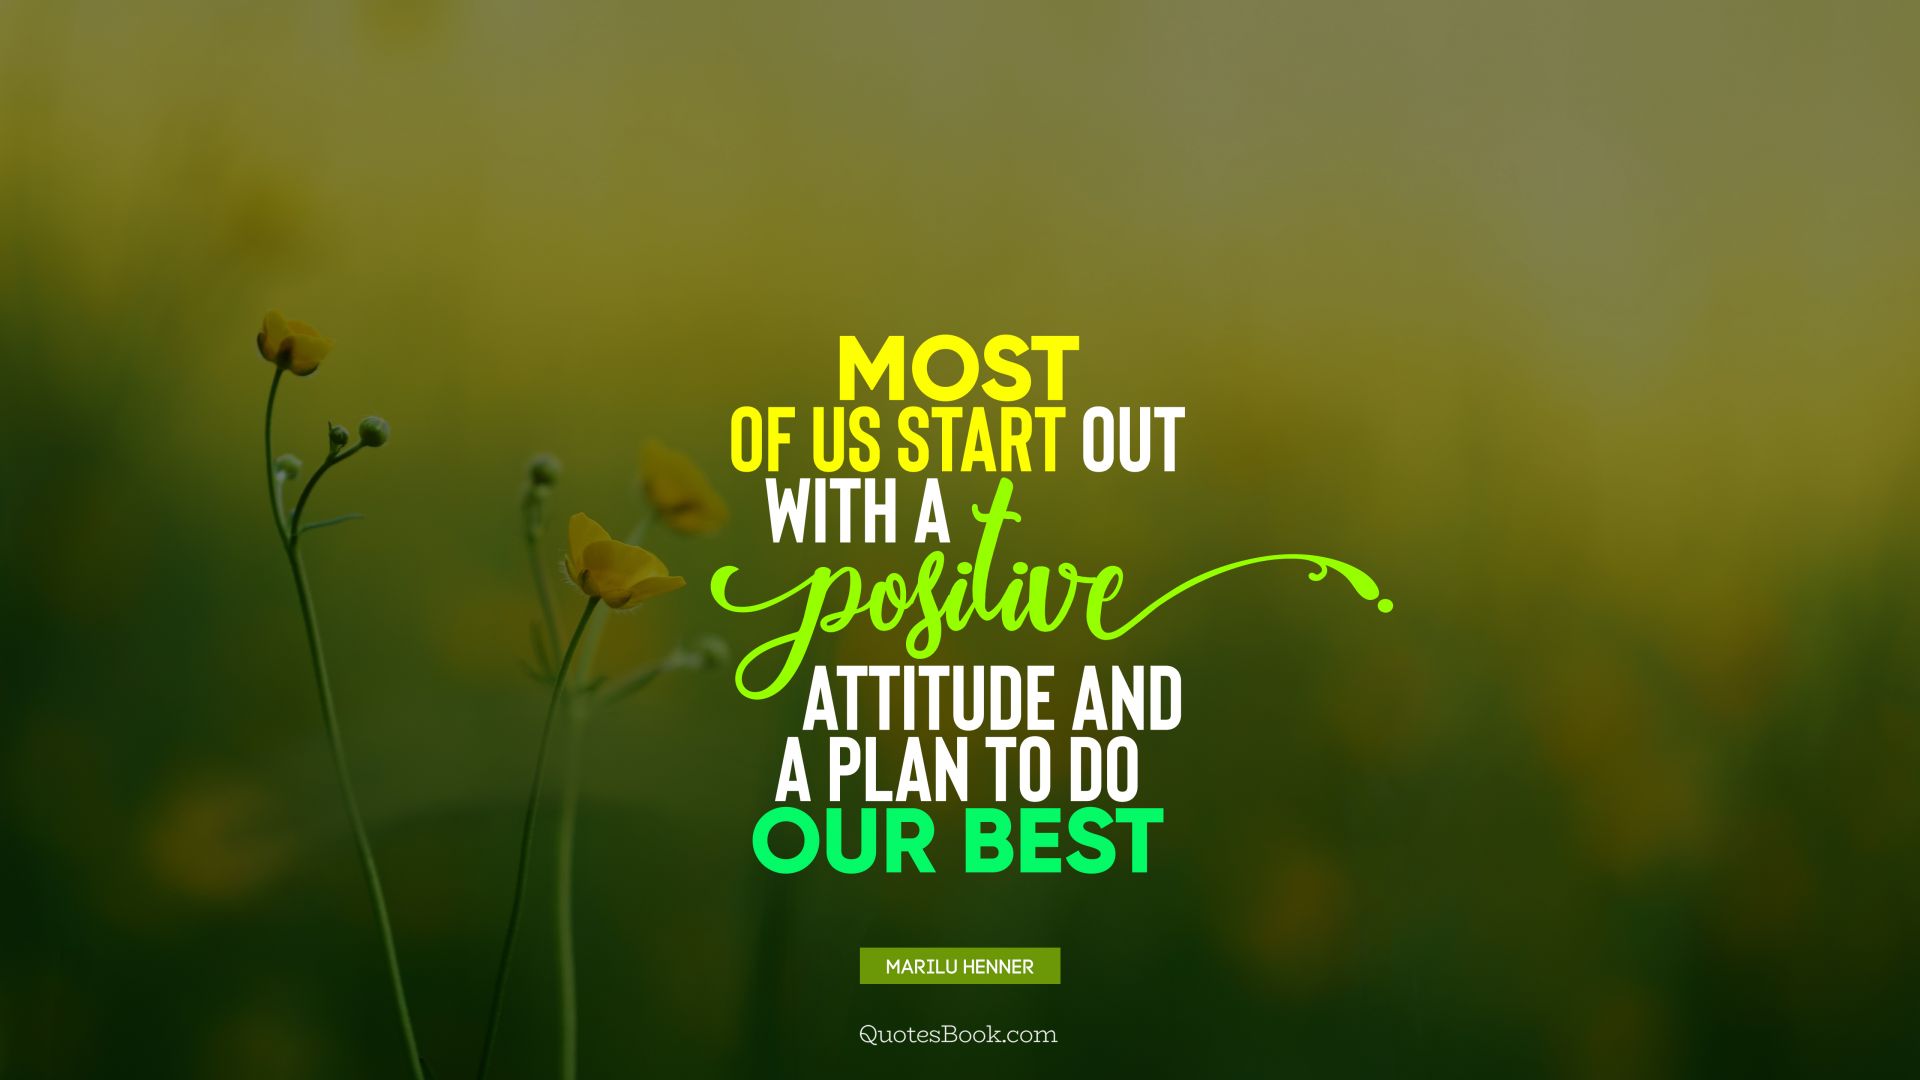 Most of us start out with a positive attitude and a plan to do our best. - Quote by Marilu Henner